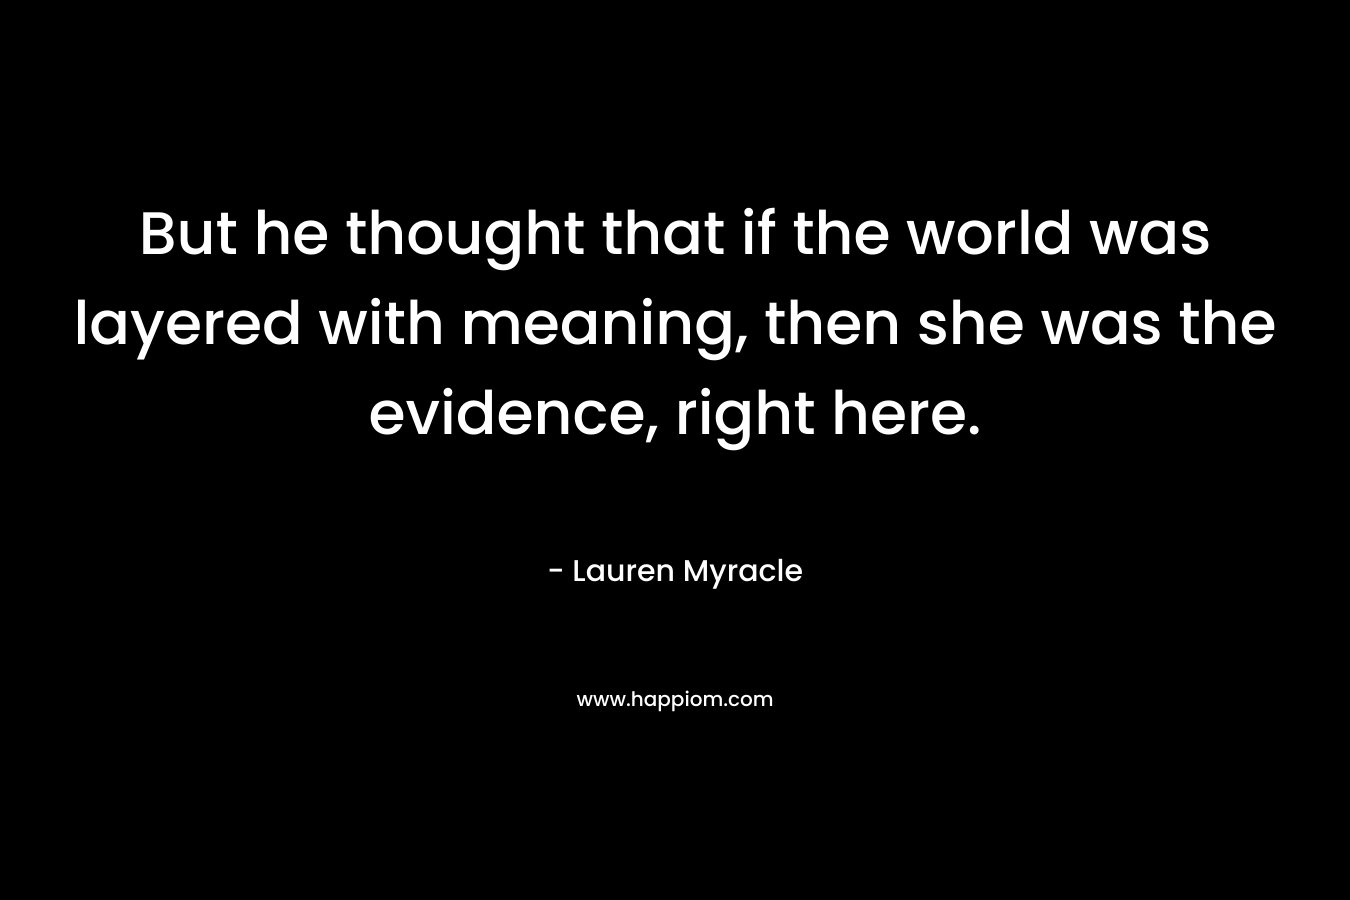 But he thought that if the world was layered with meaning, then she was the evidence, right here. – Lauren Myracle